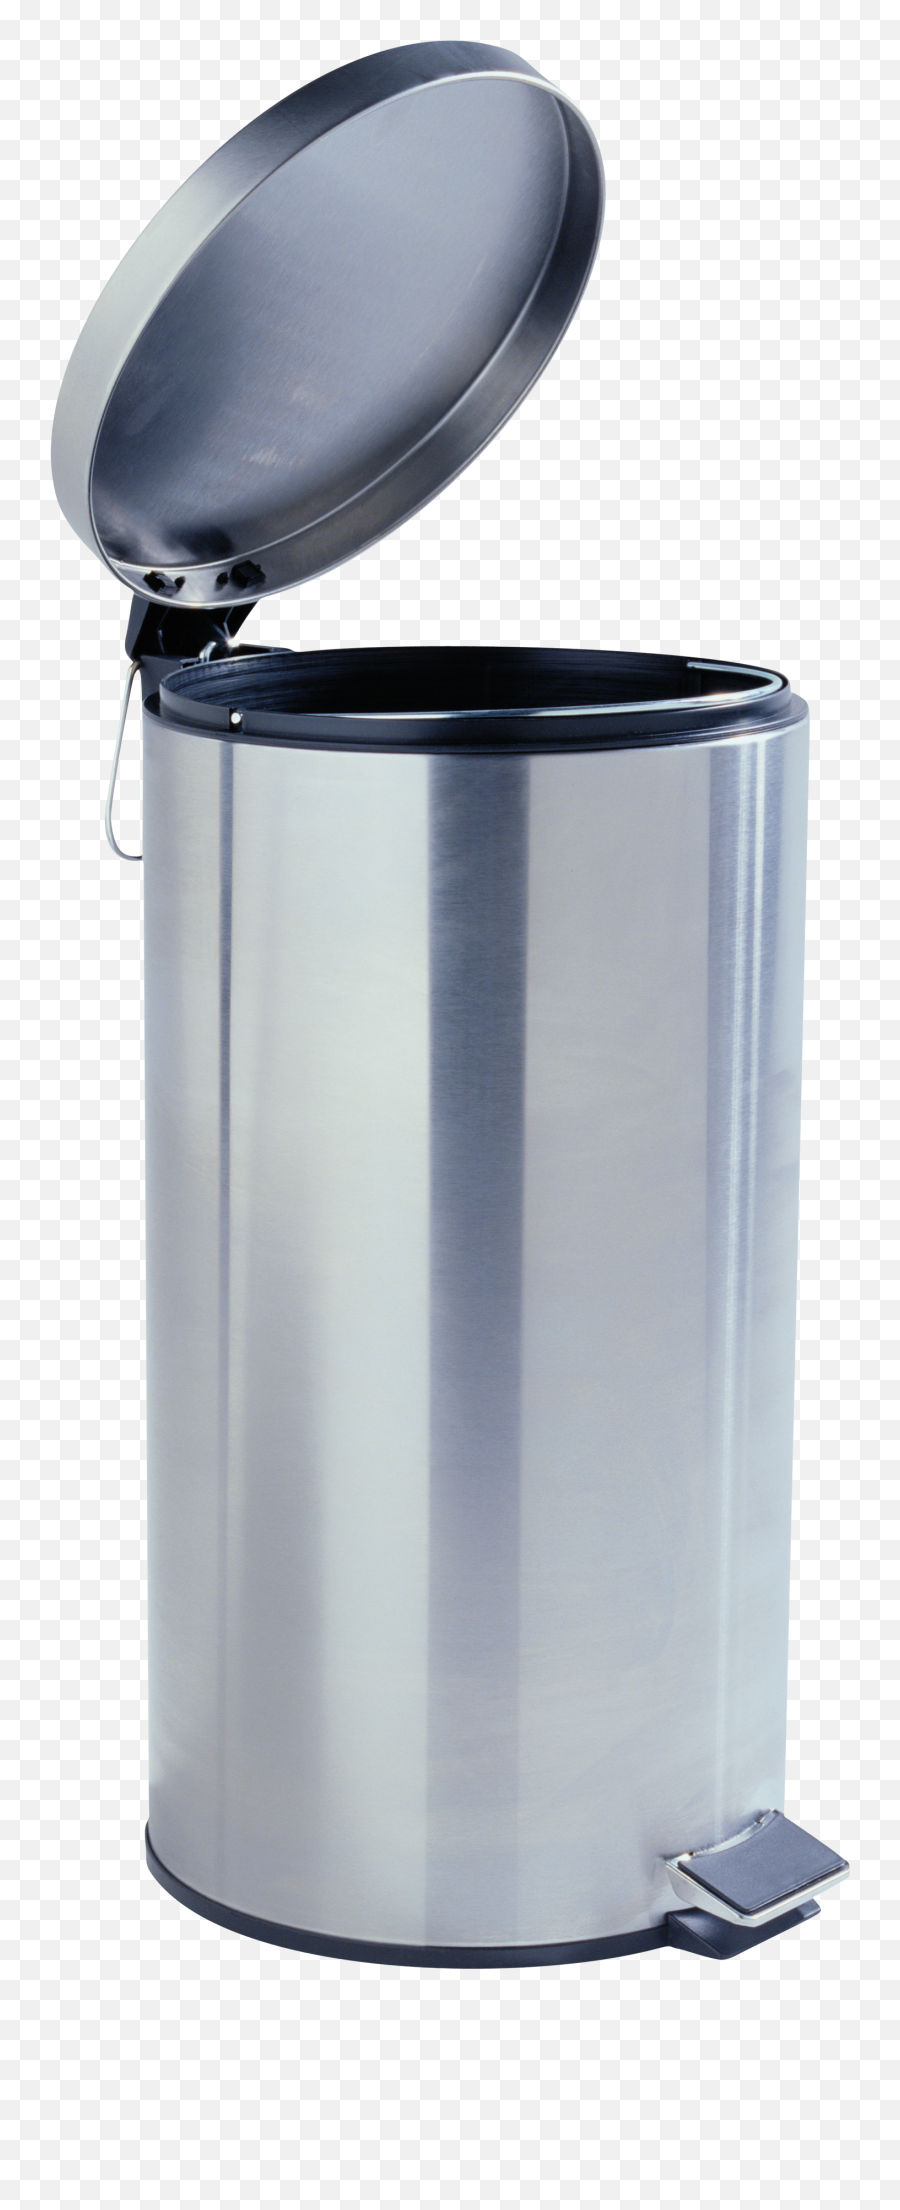 Trash Can Png Images Free Download - Garbage Can Transparent Background,Garbage Png